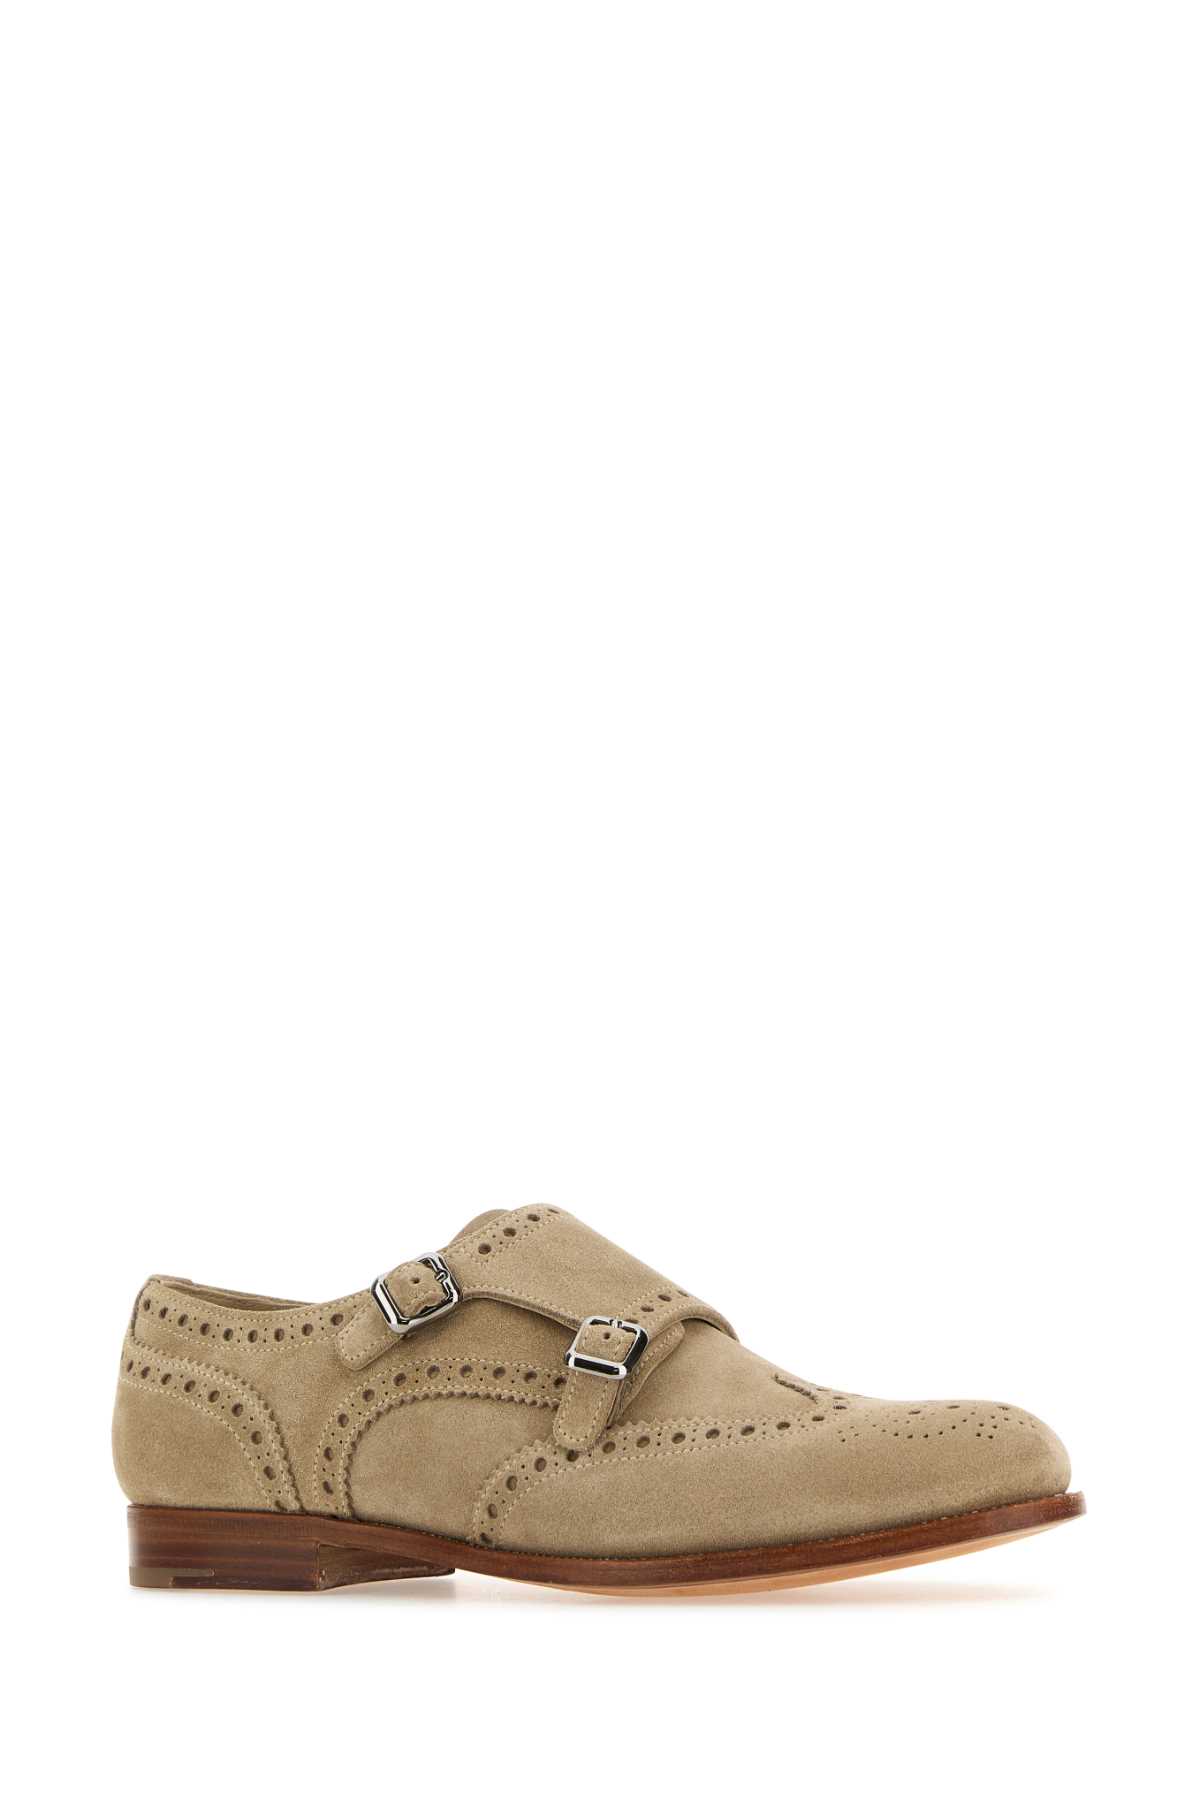 Shop Church's Sand Suede Monk Strap Shoes In Desert